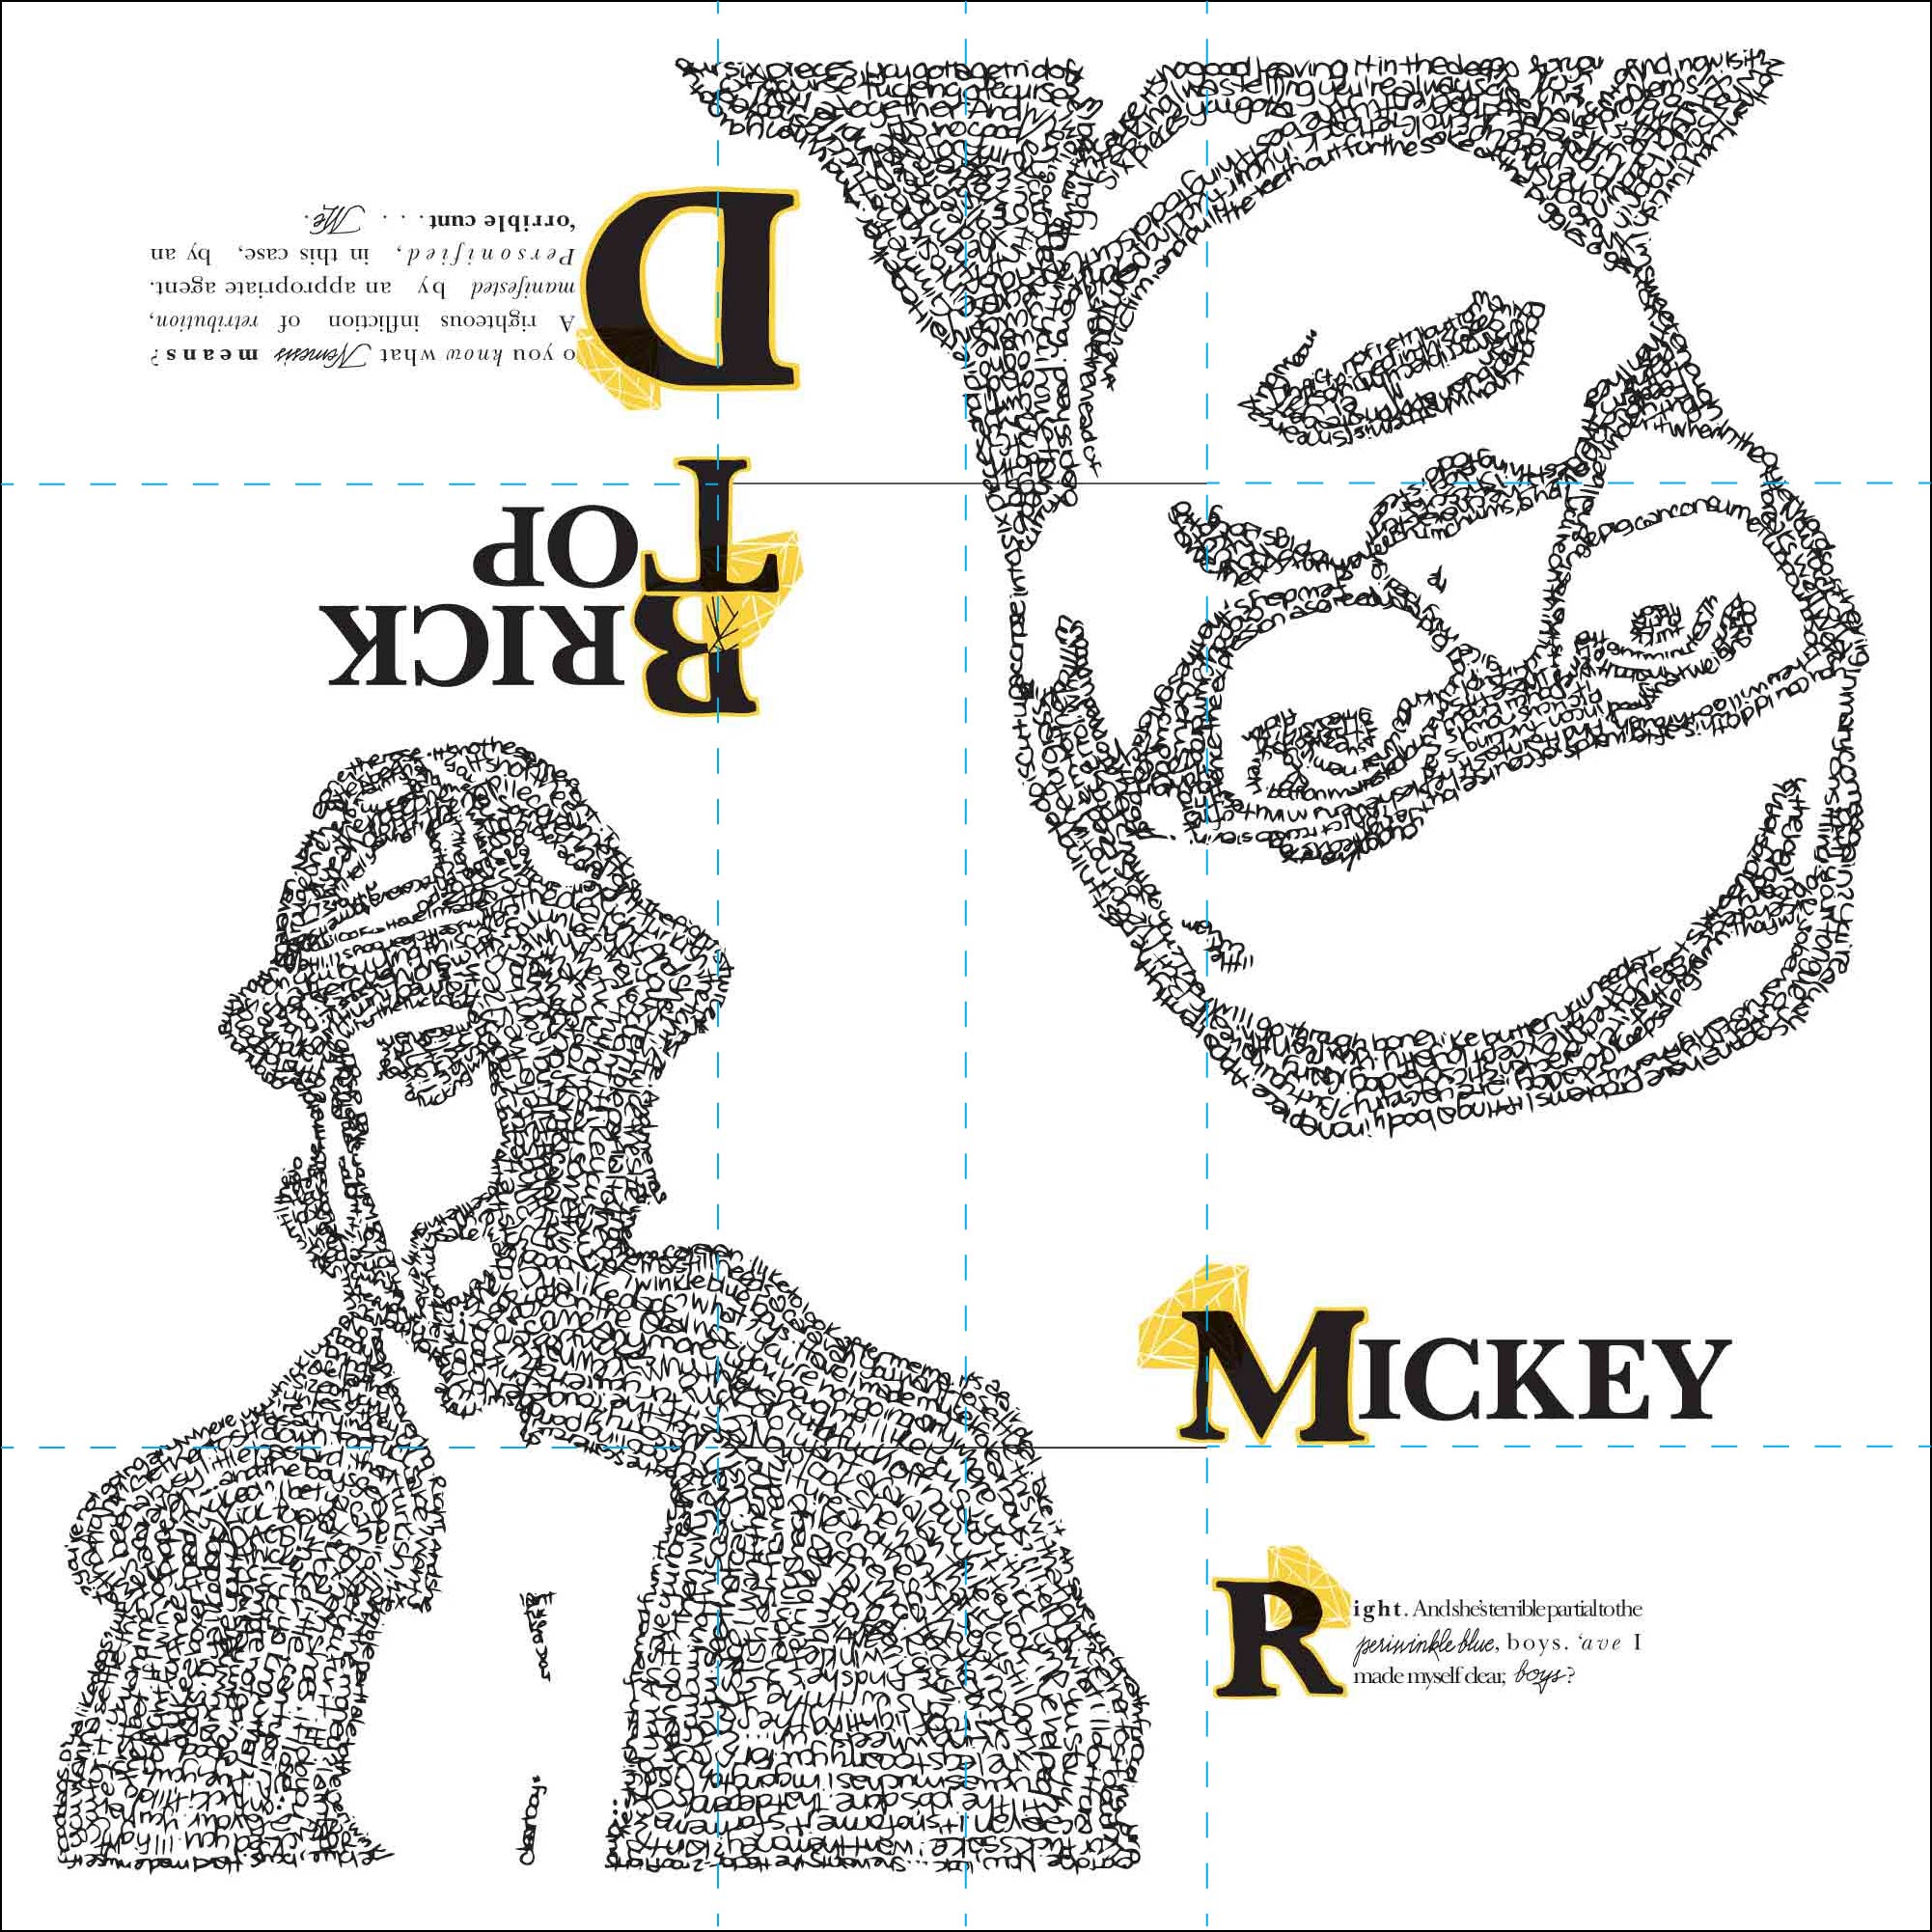 Brick Top & Mickey Fold-out <br> Click to see the back-side